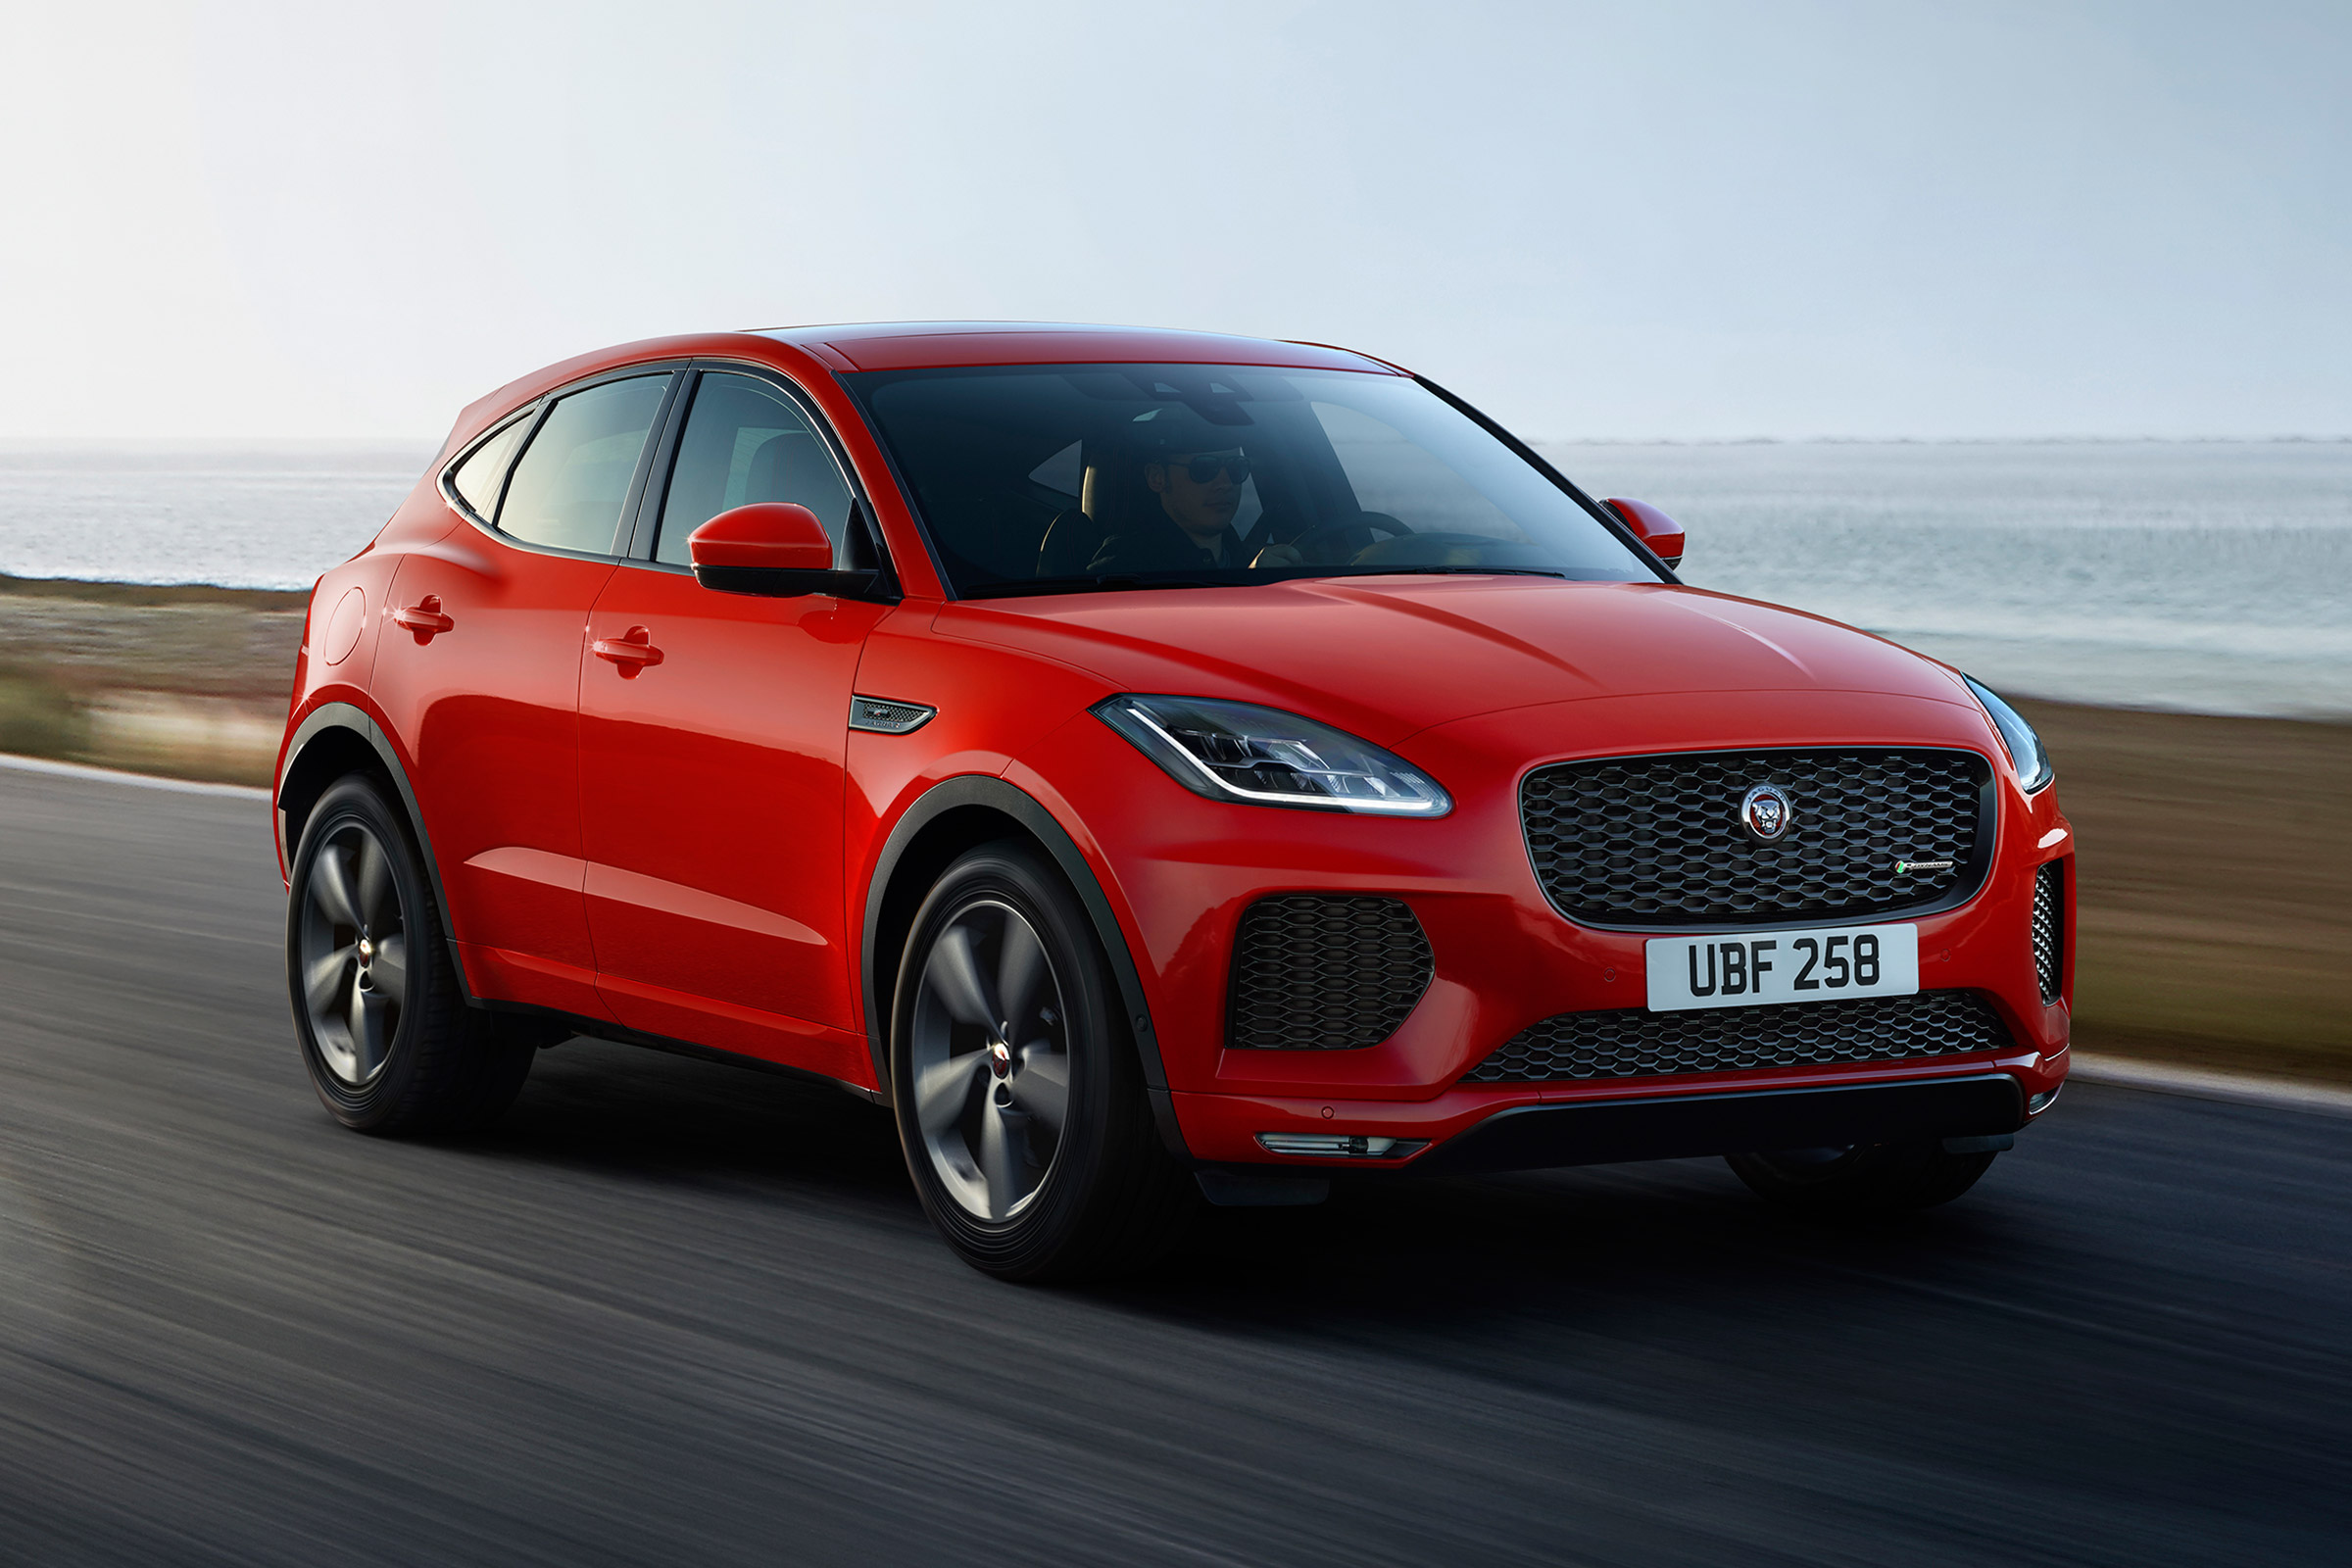 Jaguar E-Pace Chequered Flag Edition waved in | Auto Express